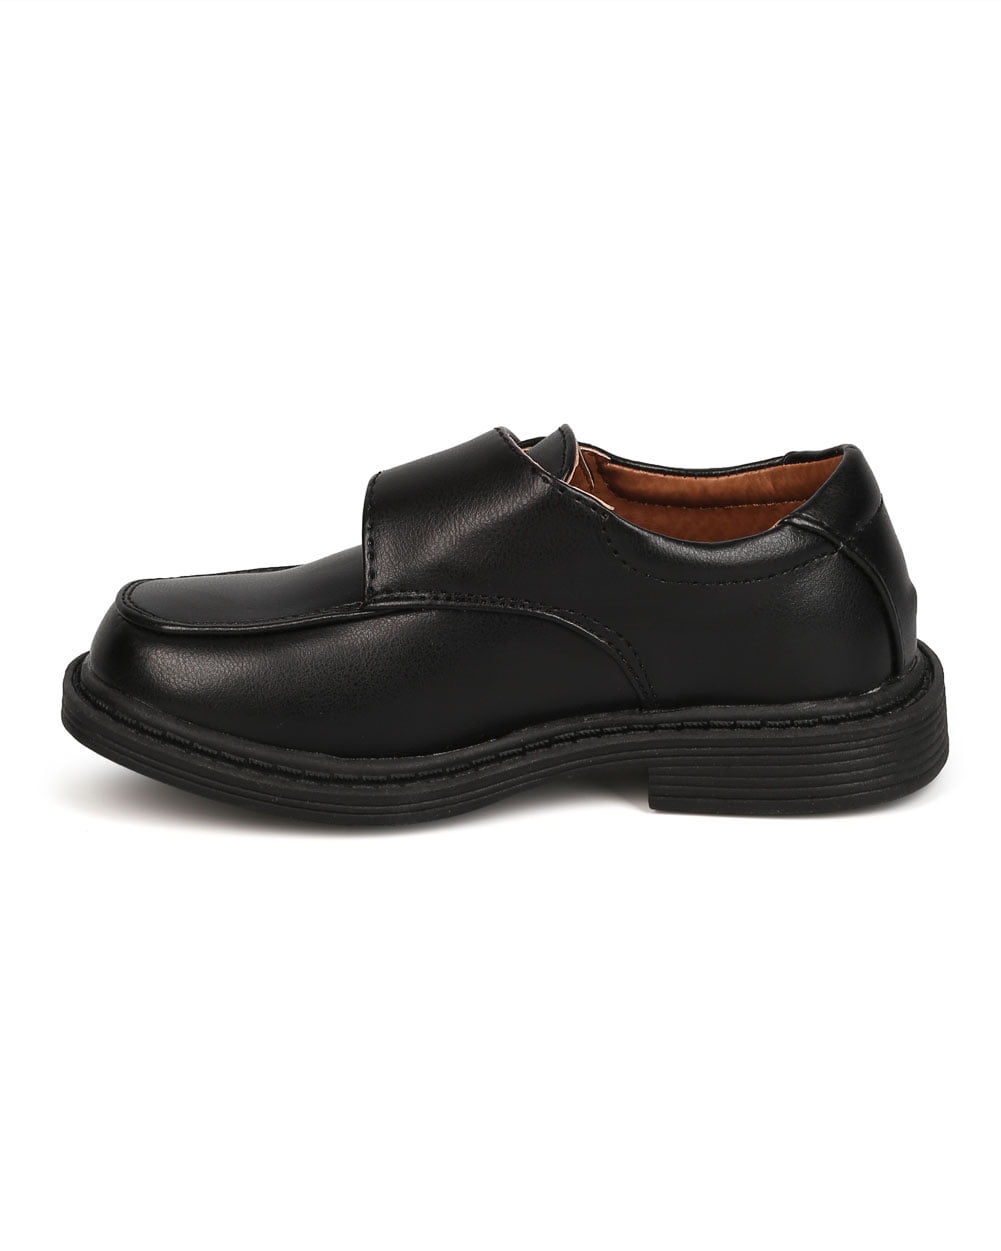 New Boy School Rider Ricky-913F Leatherette Square Toe Banded Dress Shoe 